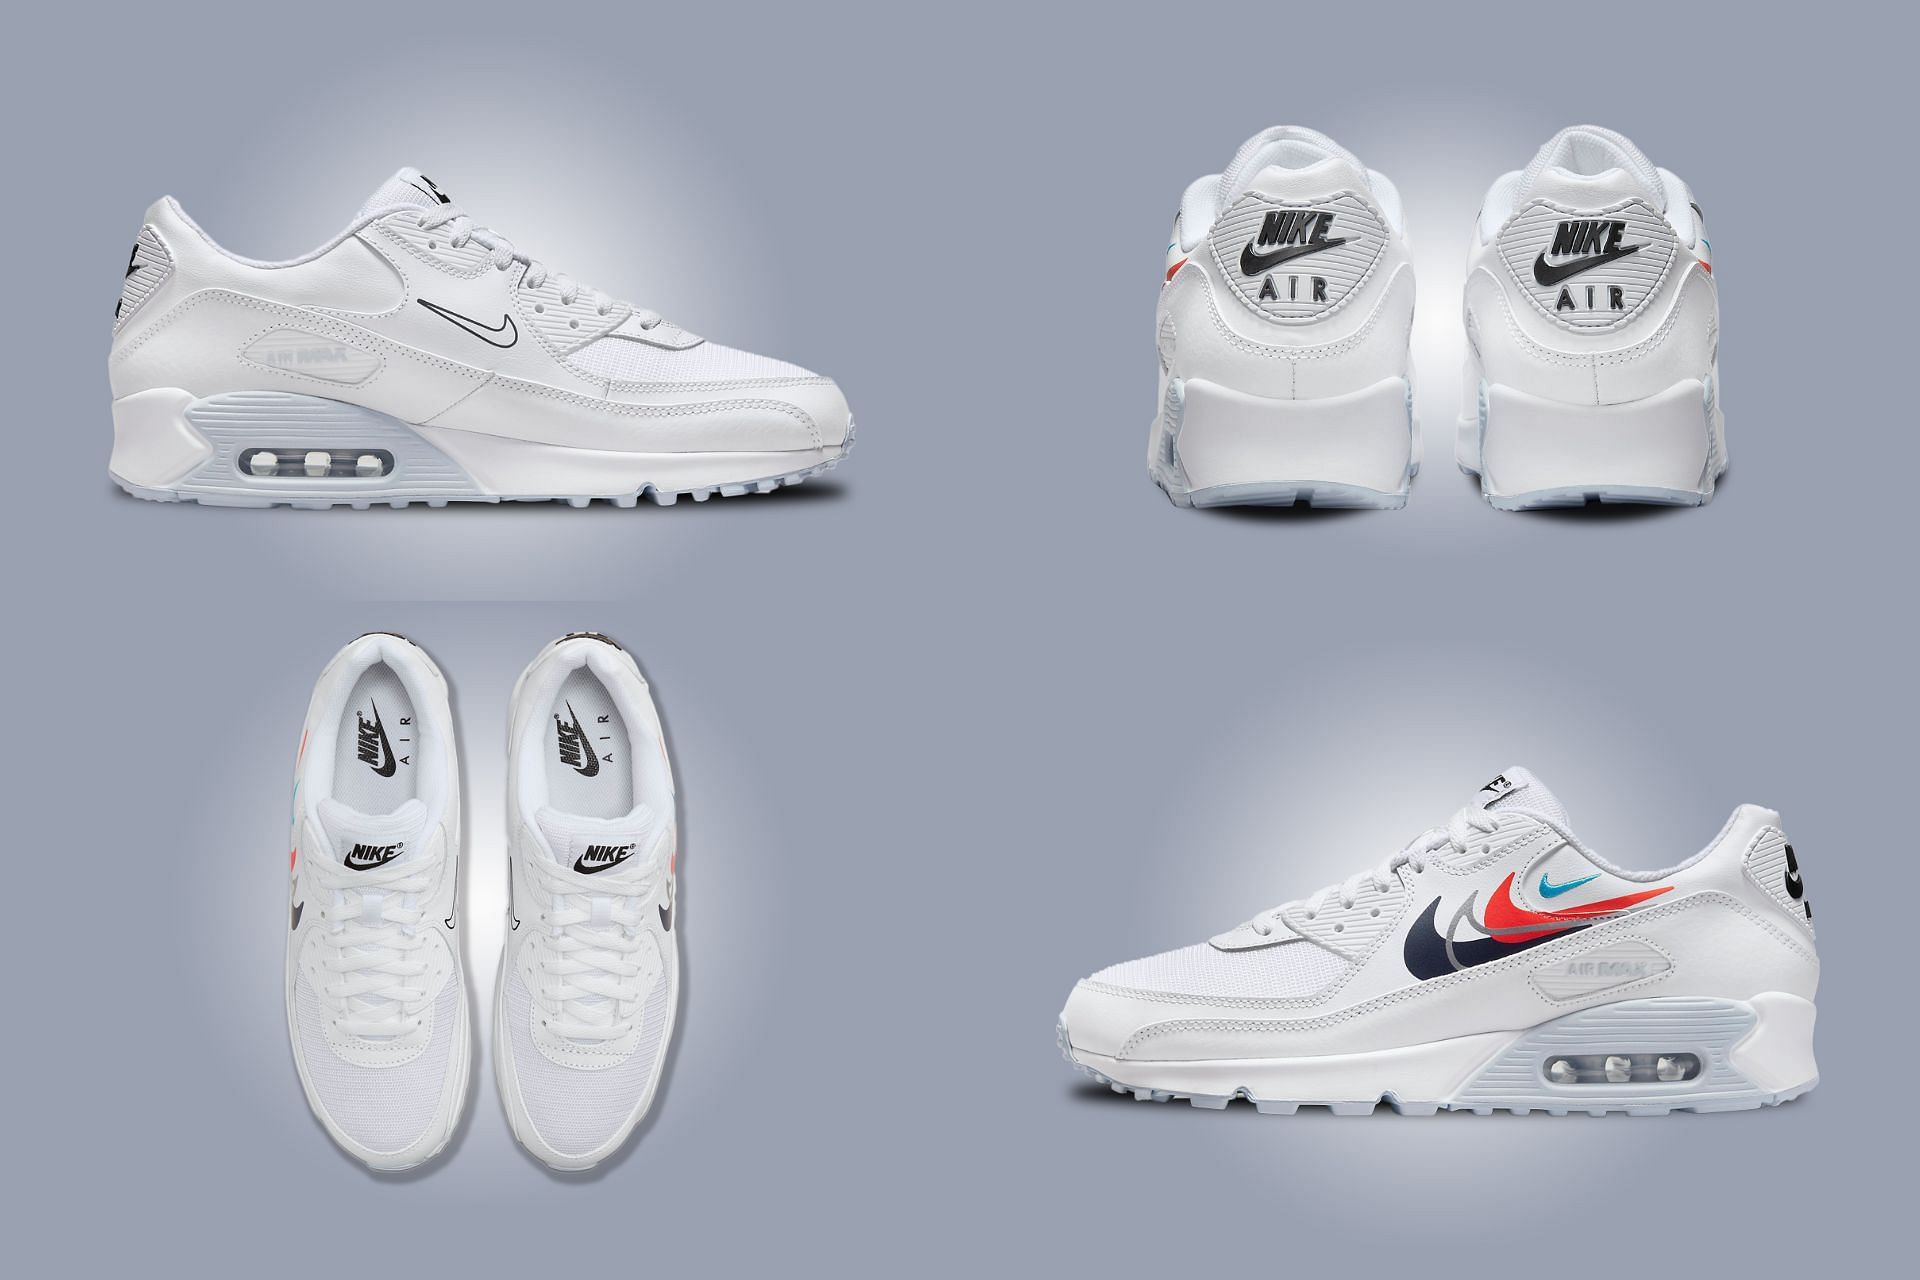 The upcoming Nike Air Max 90 &quot;Quadruple Swoosh White&quot; sneakers, which are being revealed after Air Force 1 and Air Max Plus 3 themed makeovers (Image via Sportskeeda)